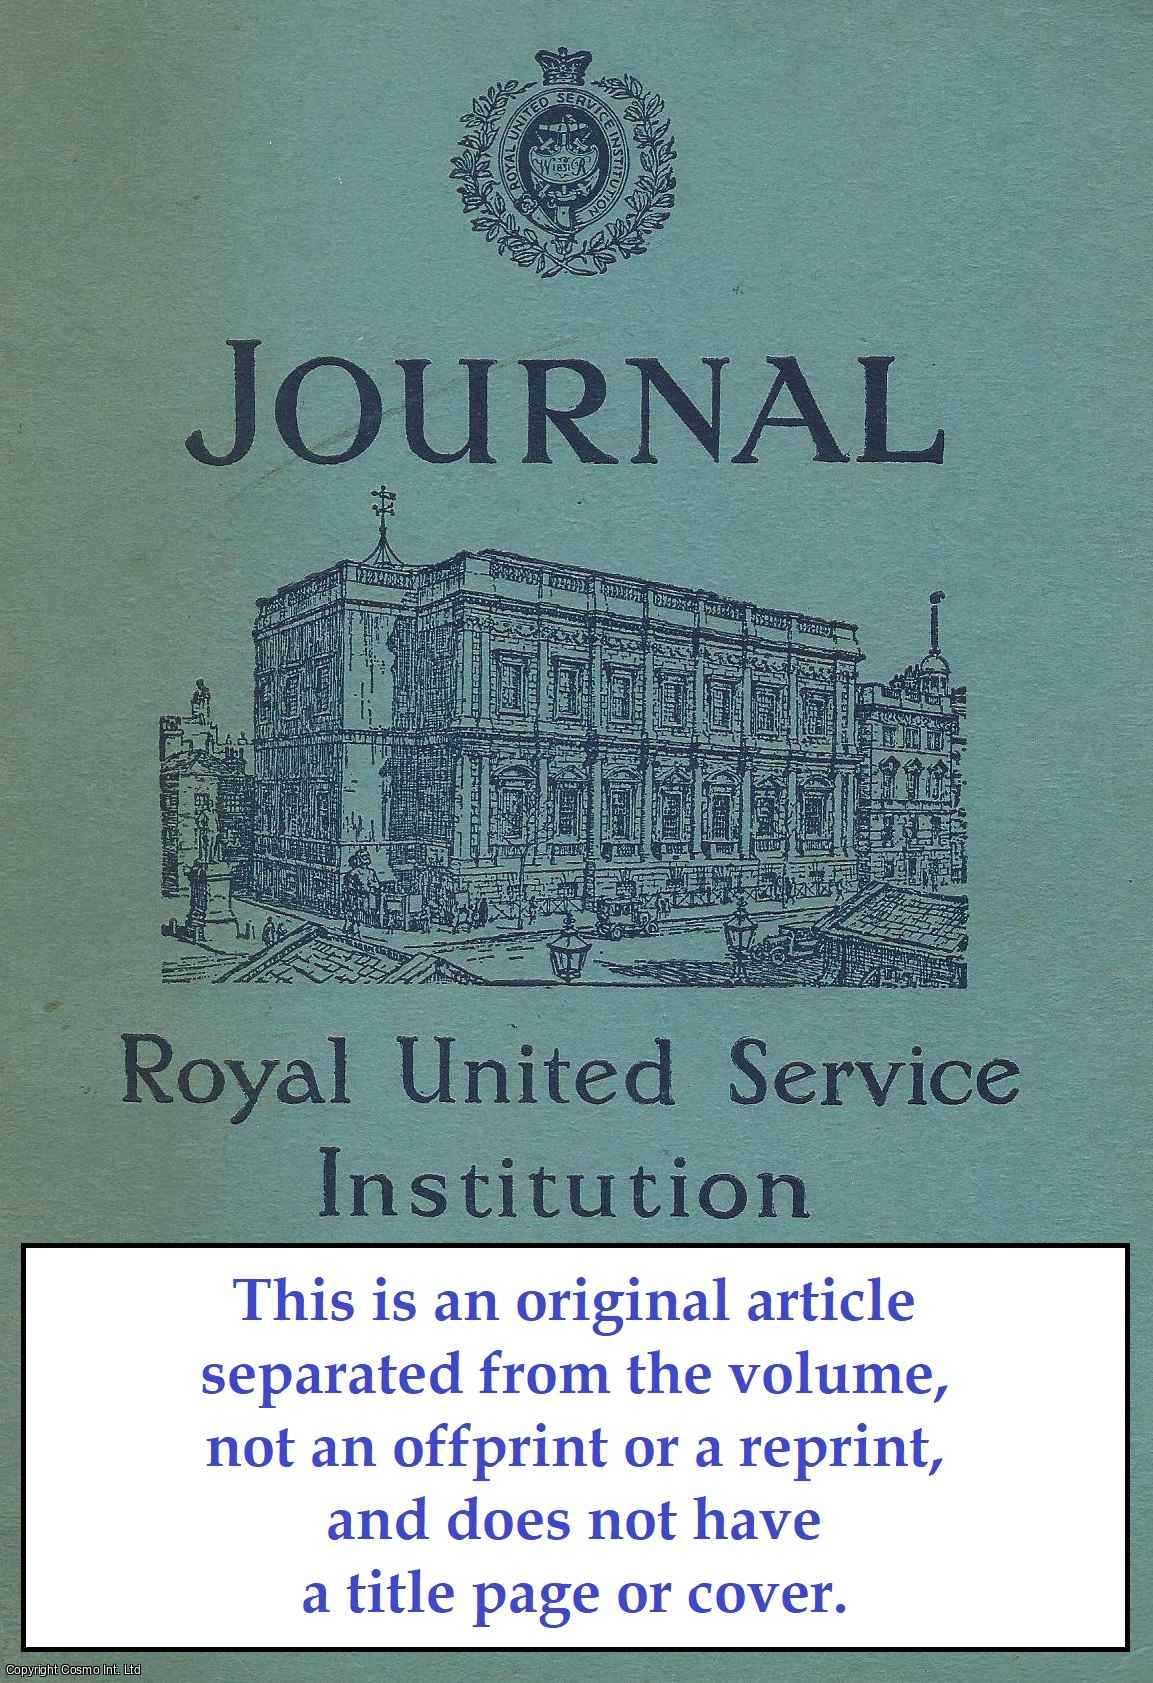 Alastair Buchan - The Deterrent and Disarmament. An original article from Journal of The Royal United Service Institution, 1961.